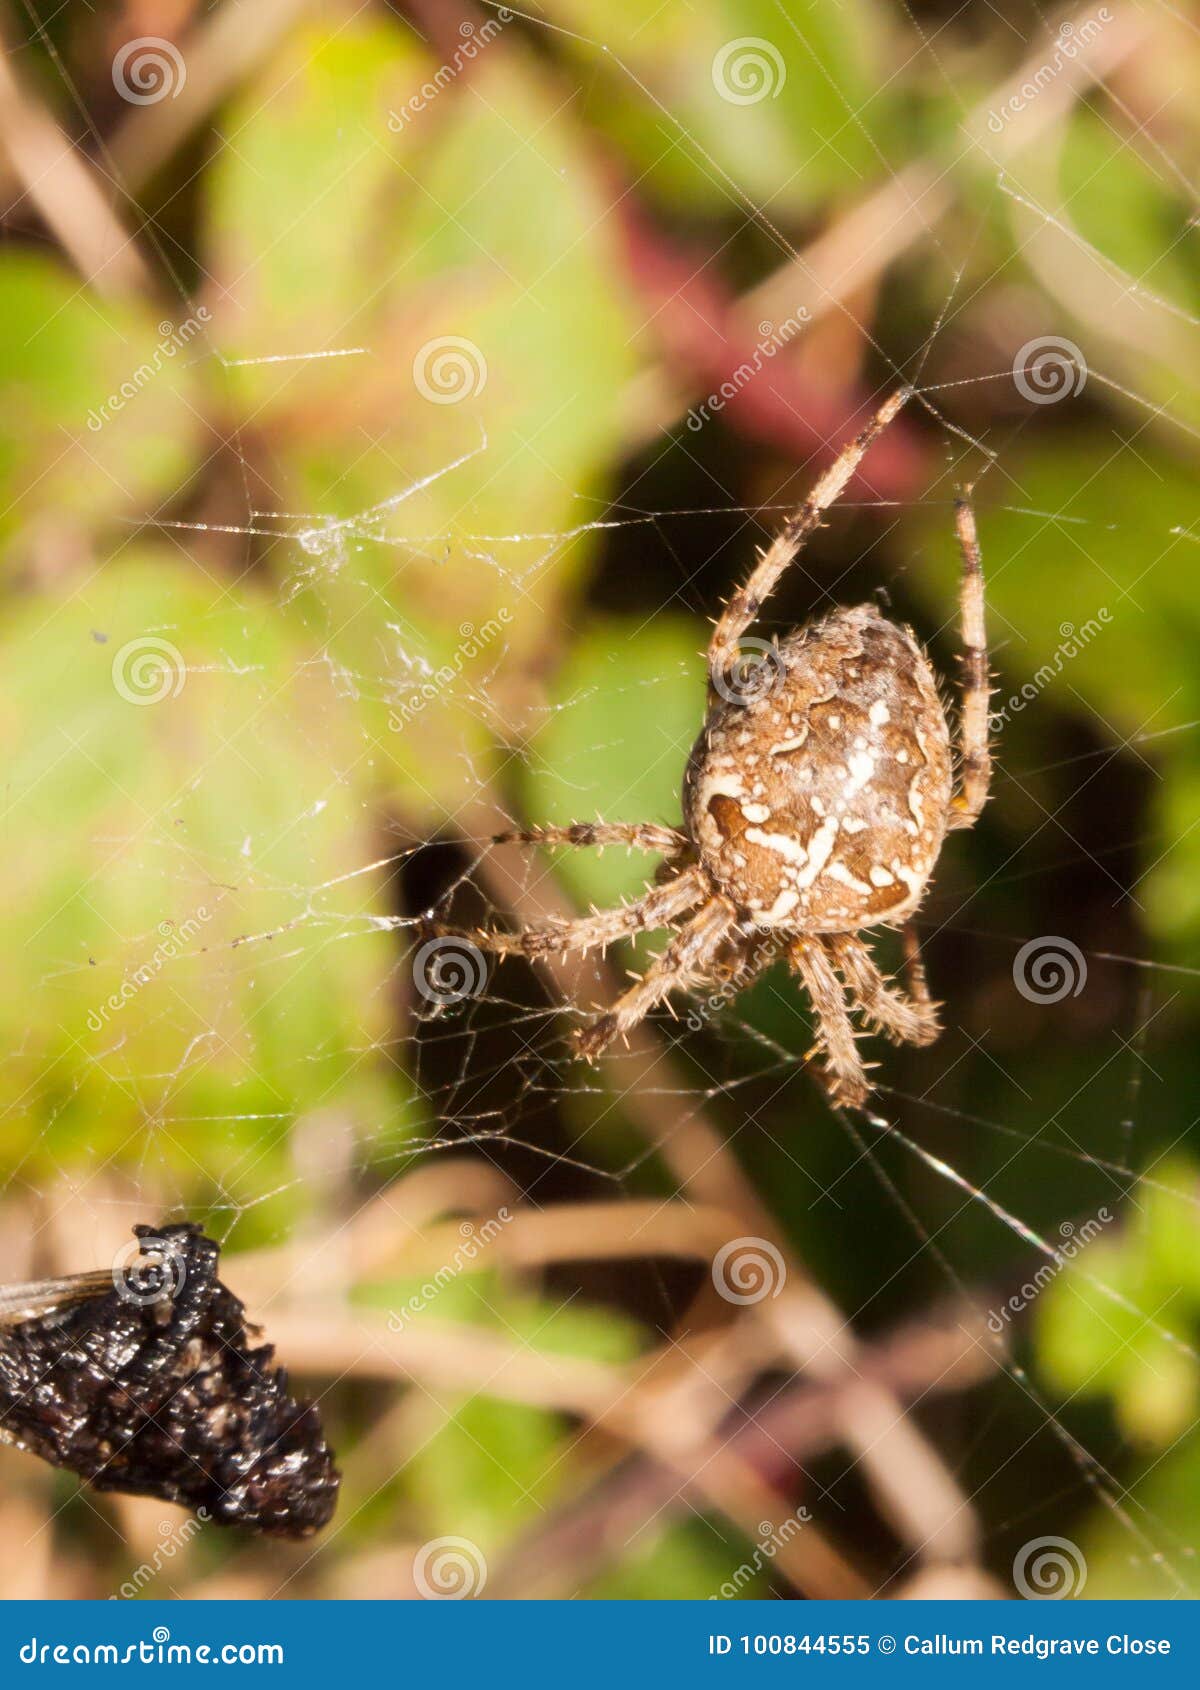 Common Garden Spider Hanging On Web Close Up Stock Image Image